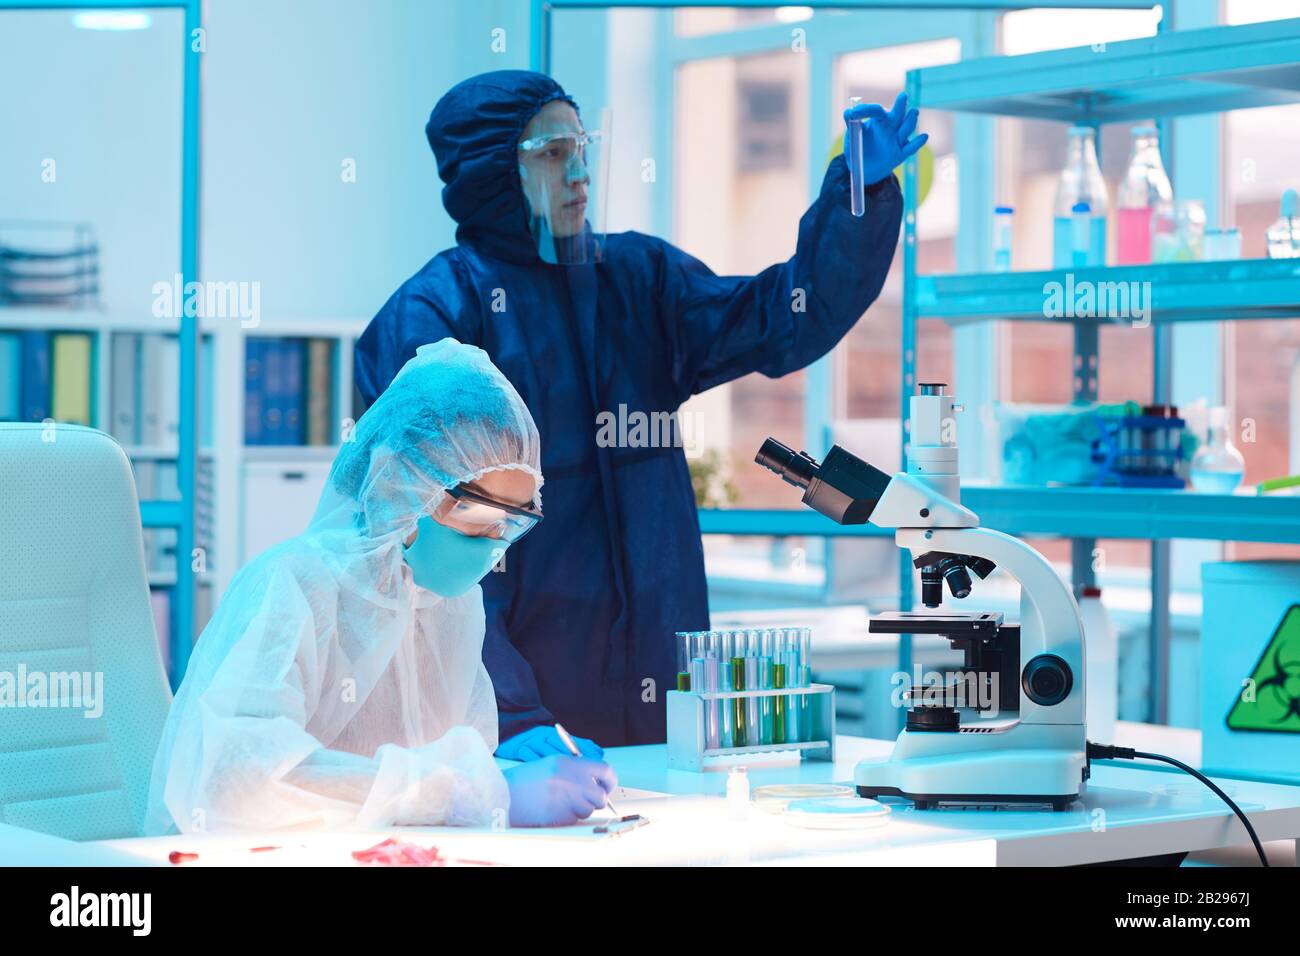 Portrait of two scientist wearing bio hazard gear working on research in medical laboratory, copy space Stock Photo